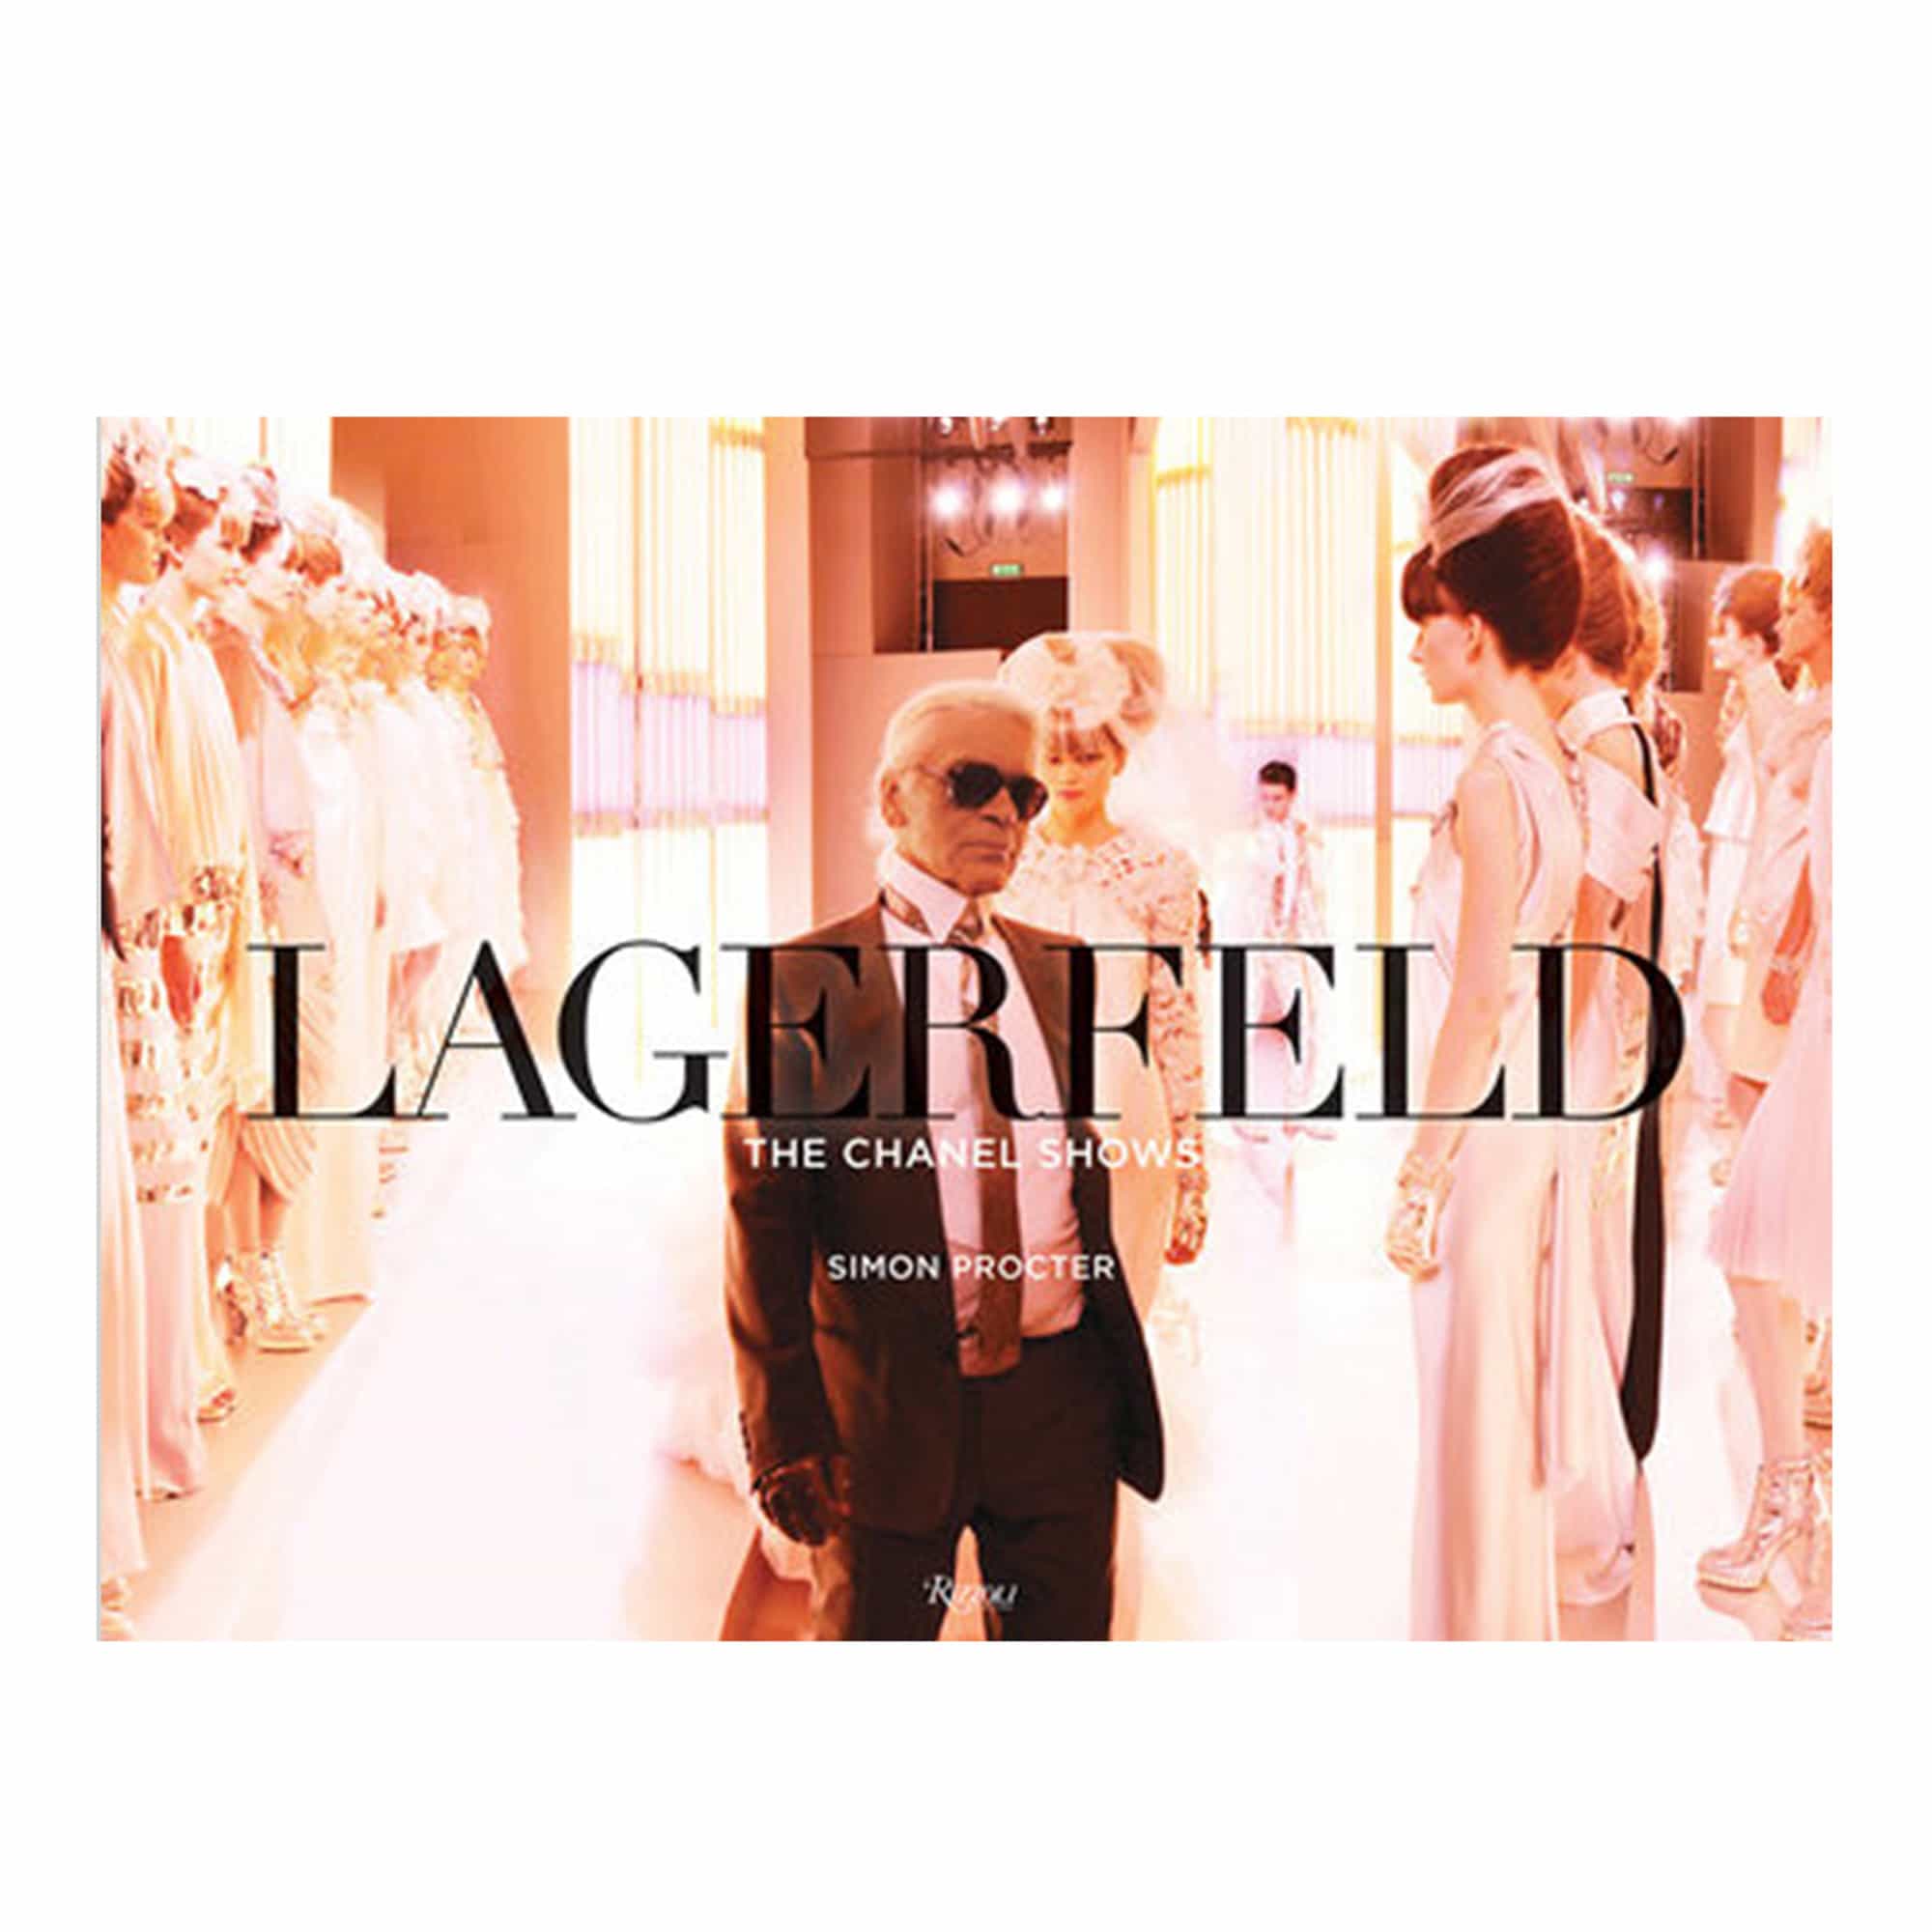 Karl Lagerfeld - The Chanel Shows